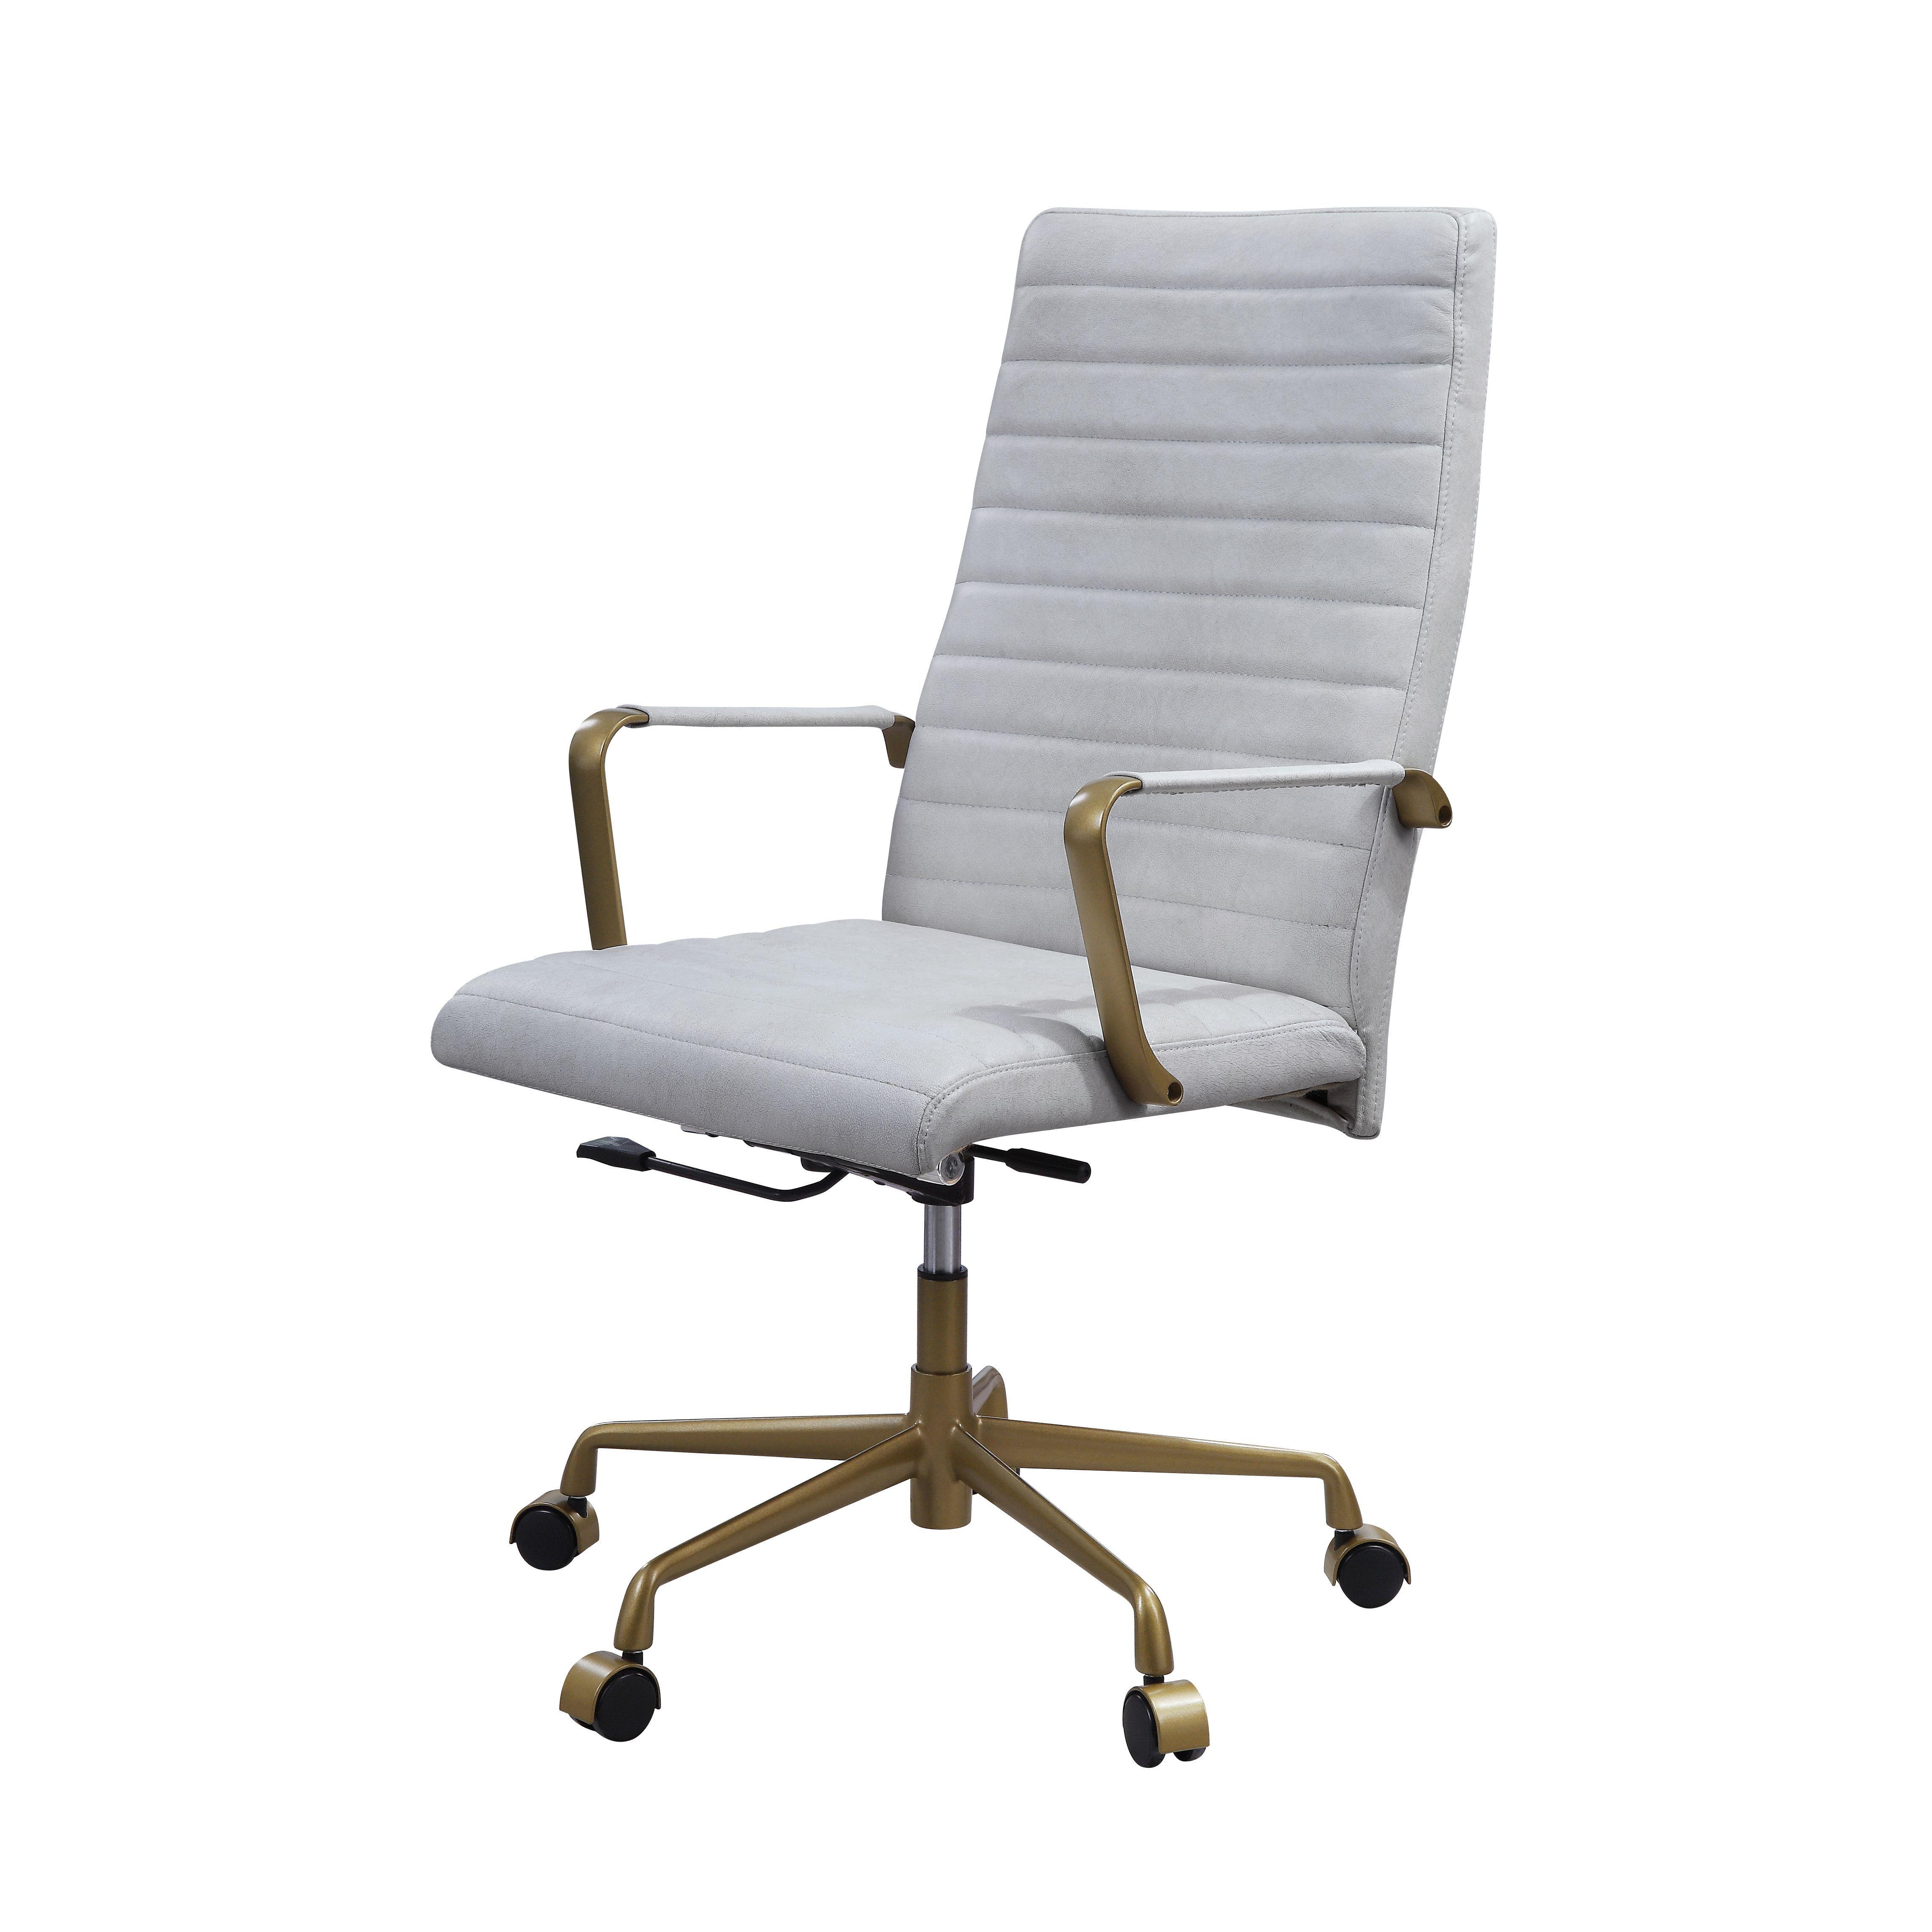 Modern Office Chair Duralo 93168 in White Top grain leather